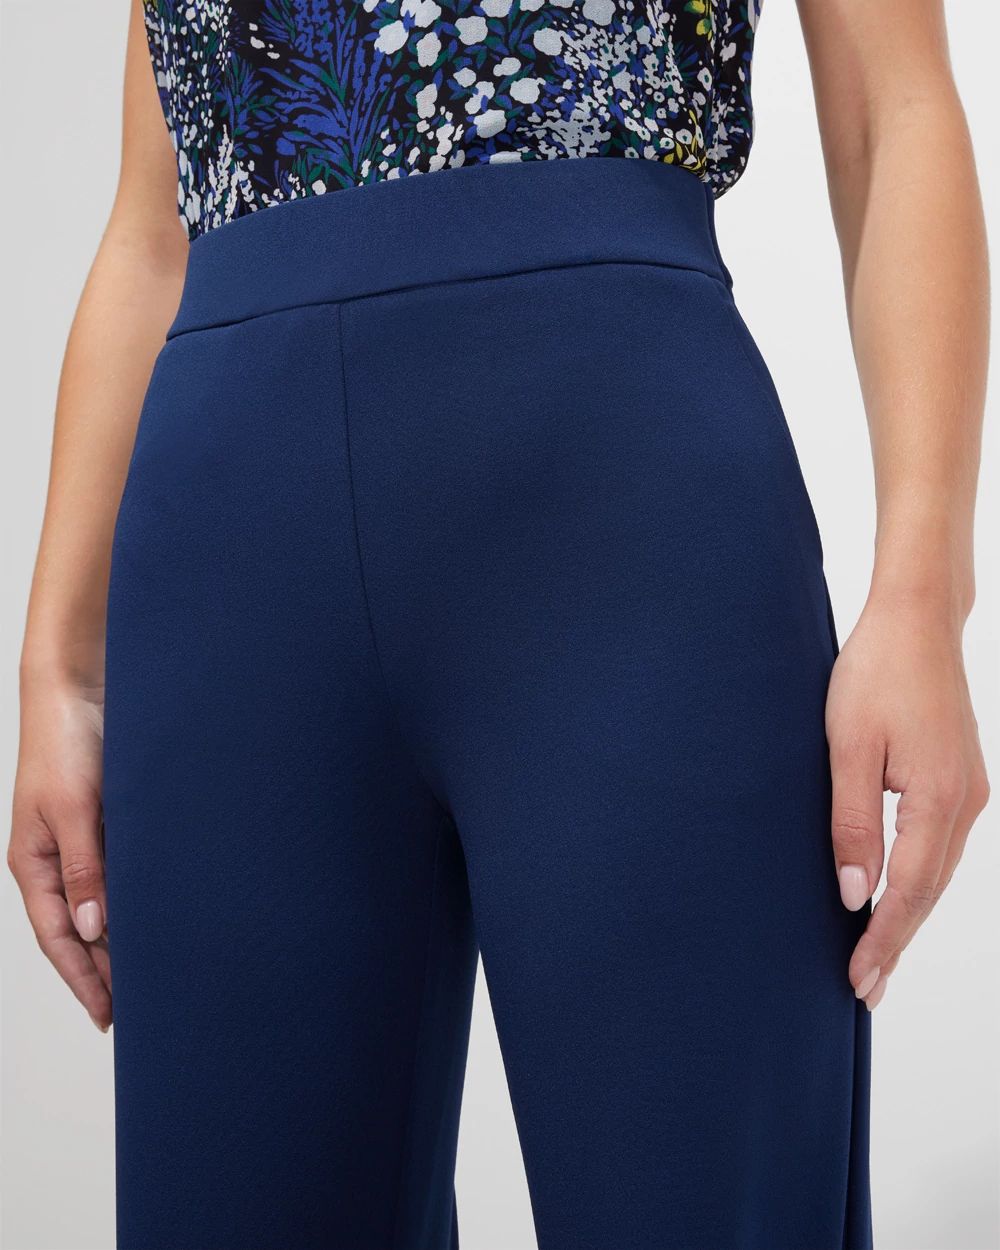 Outlet WHBM Pull-On Wide-Leg Pants